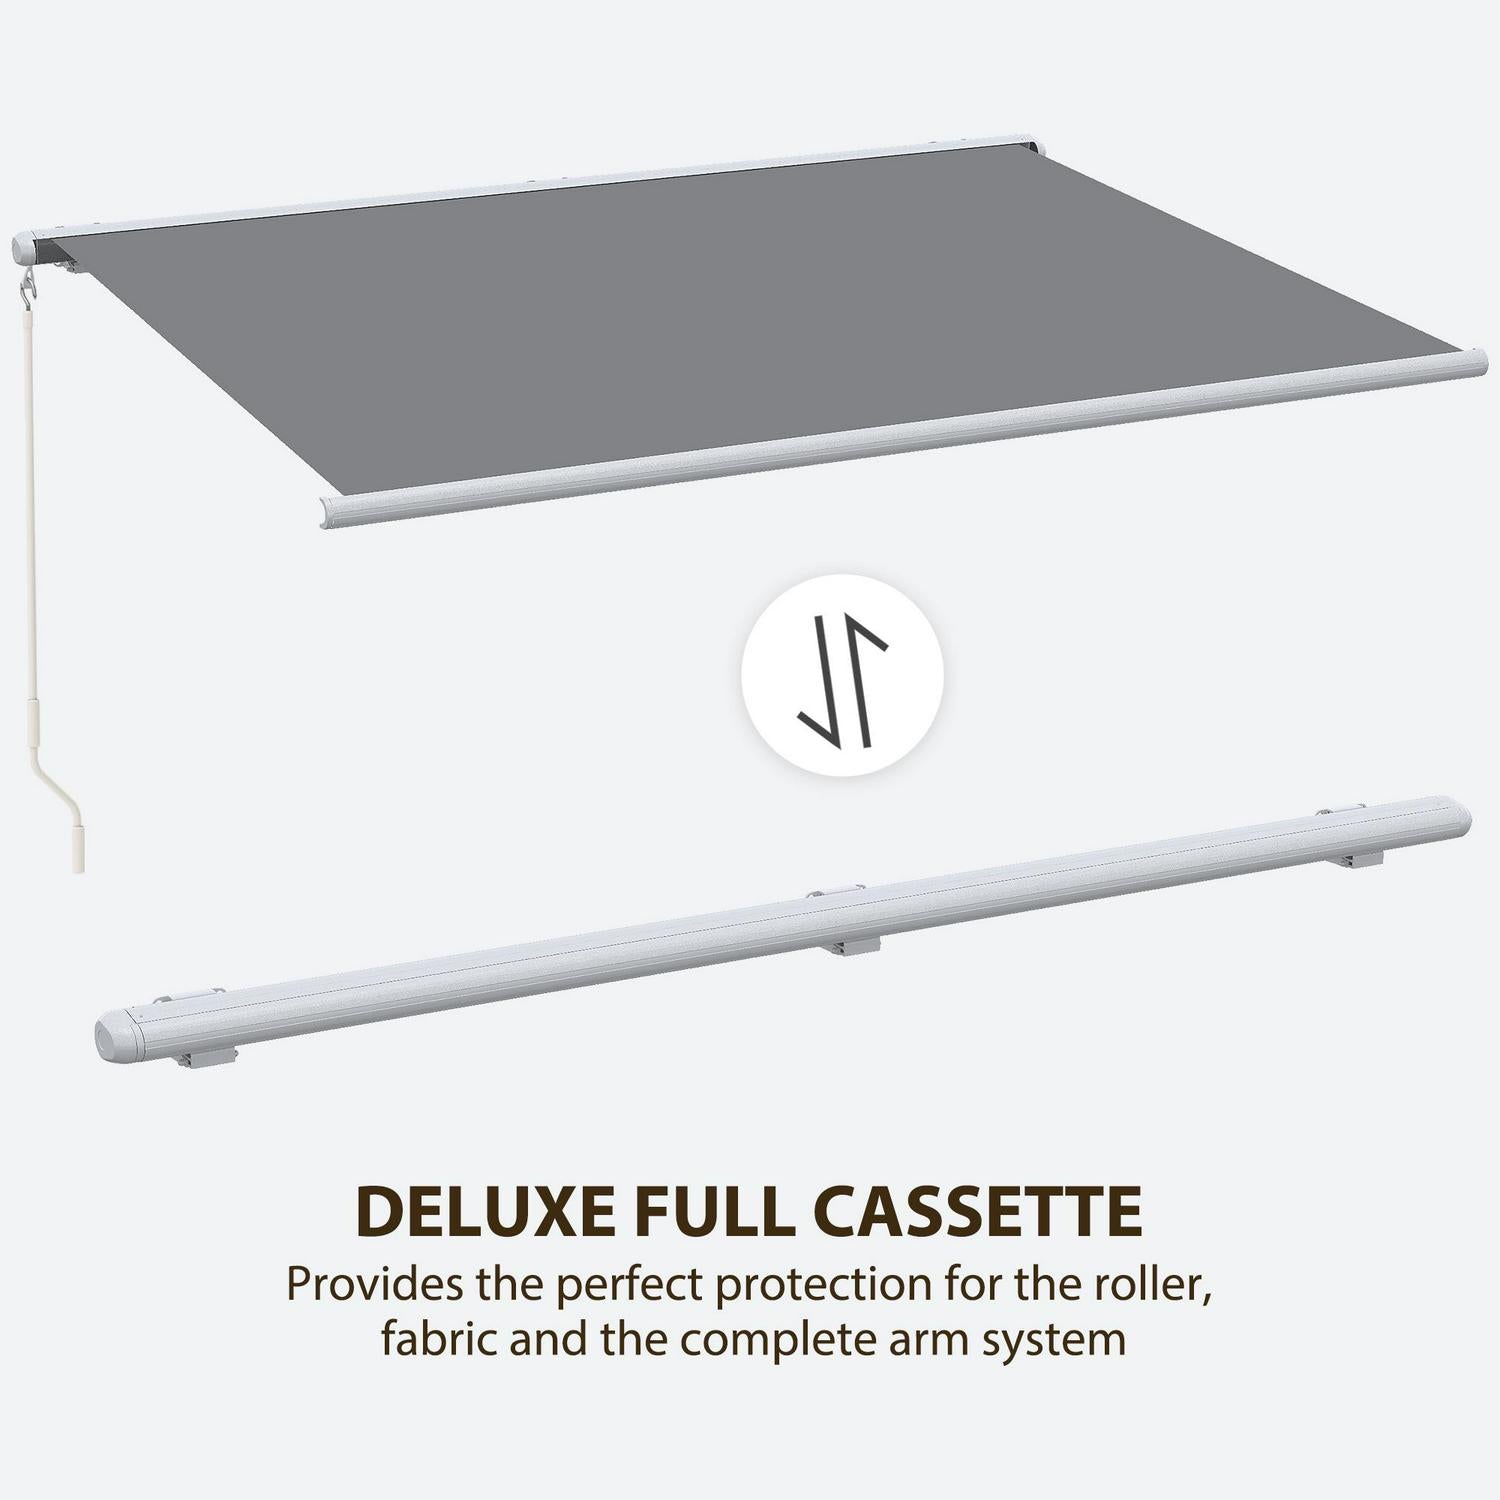 Full Cassette Electric/Manual Retractable Awning- Grey